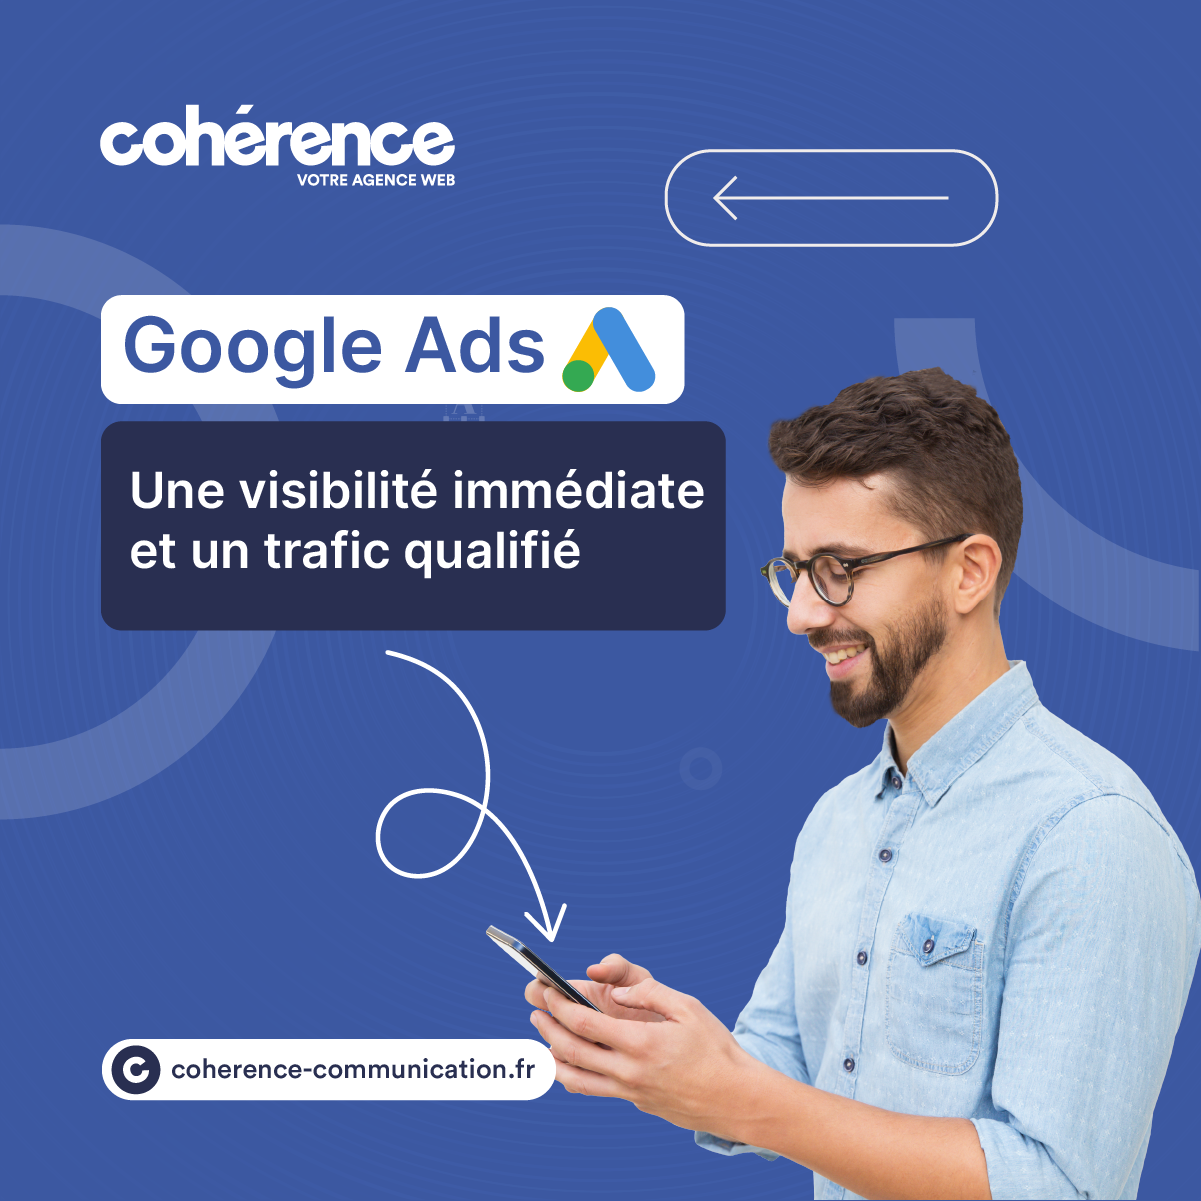 Coherence Agence Digitale Google Ads